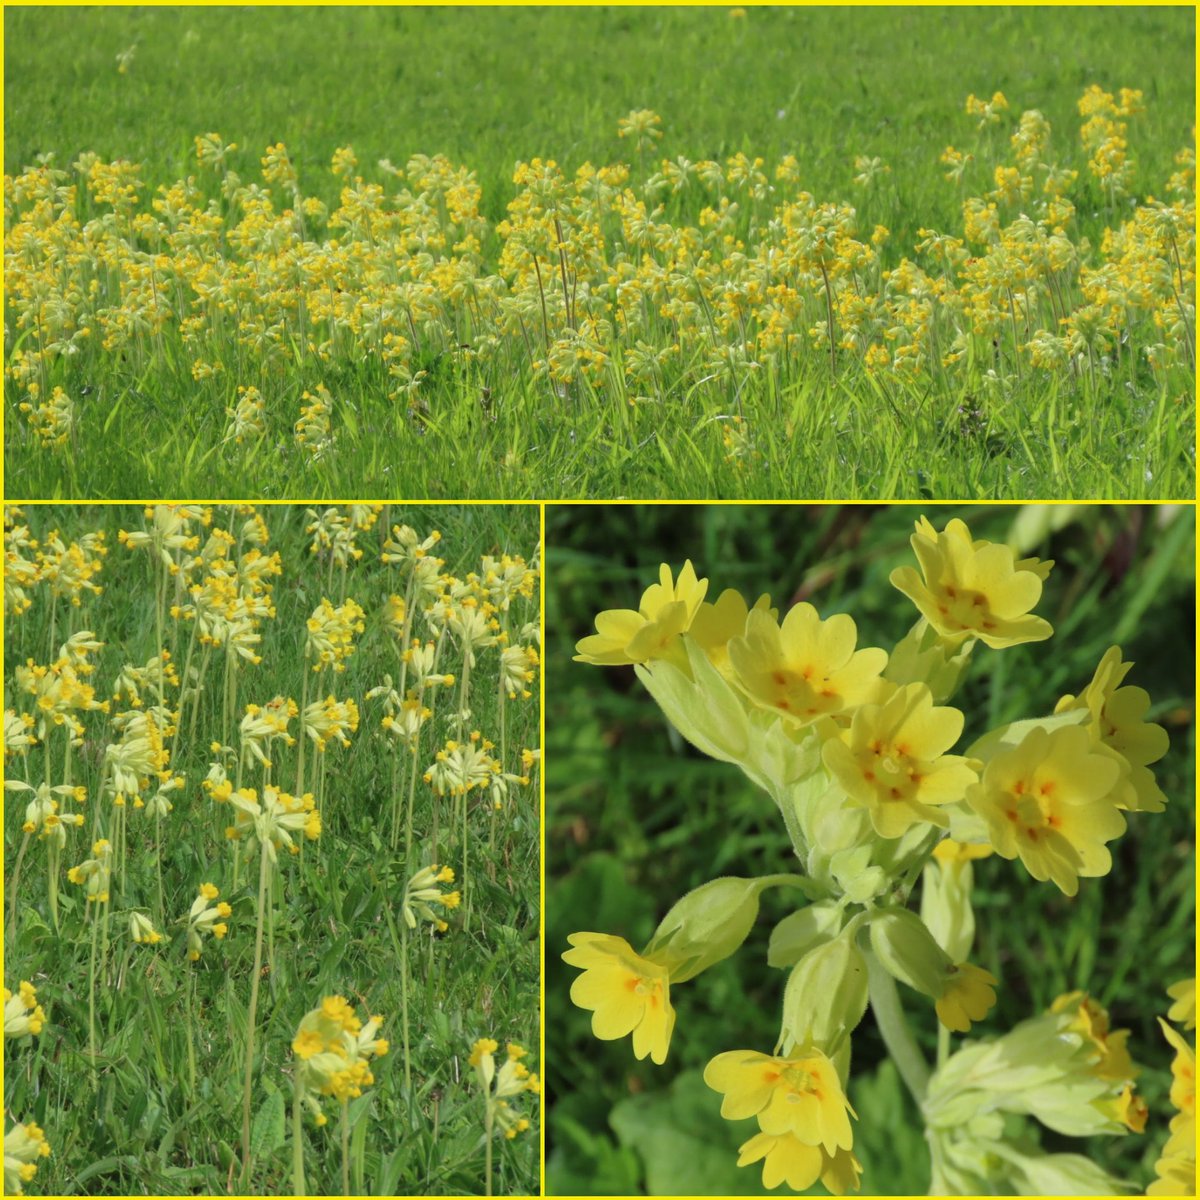 Swathes of cowslips in my dad's Suffolk meadow - unploughed for 70 years. #CowslipChallenge @wildflower_hour @BSBIbotany